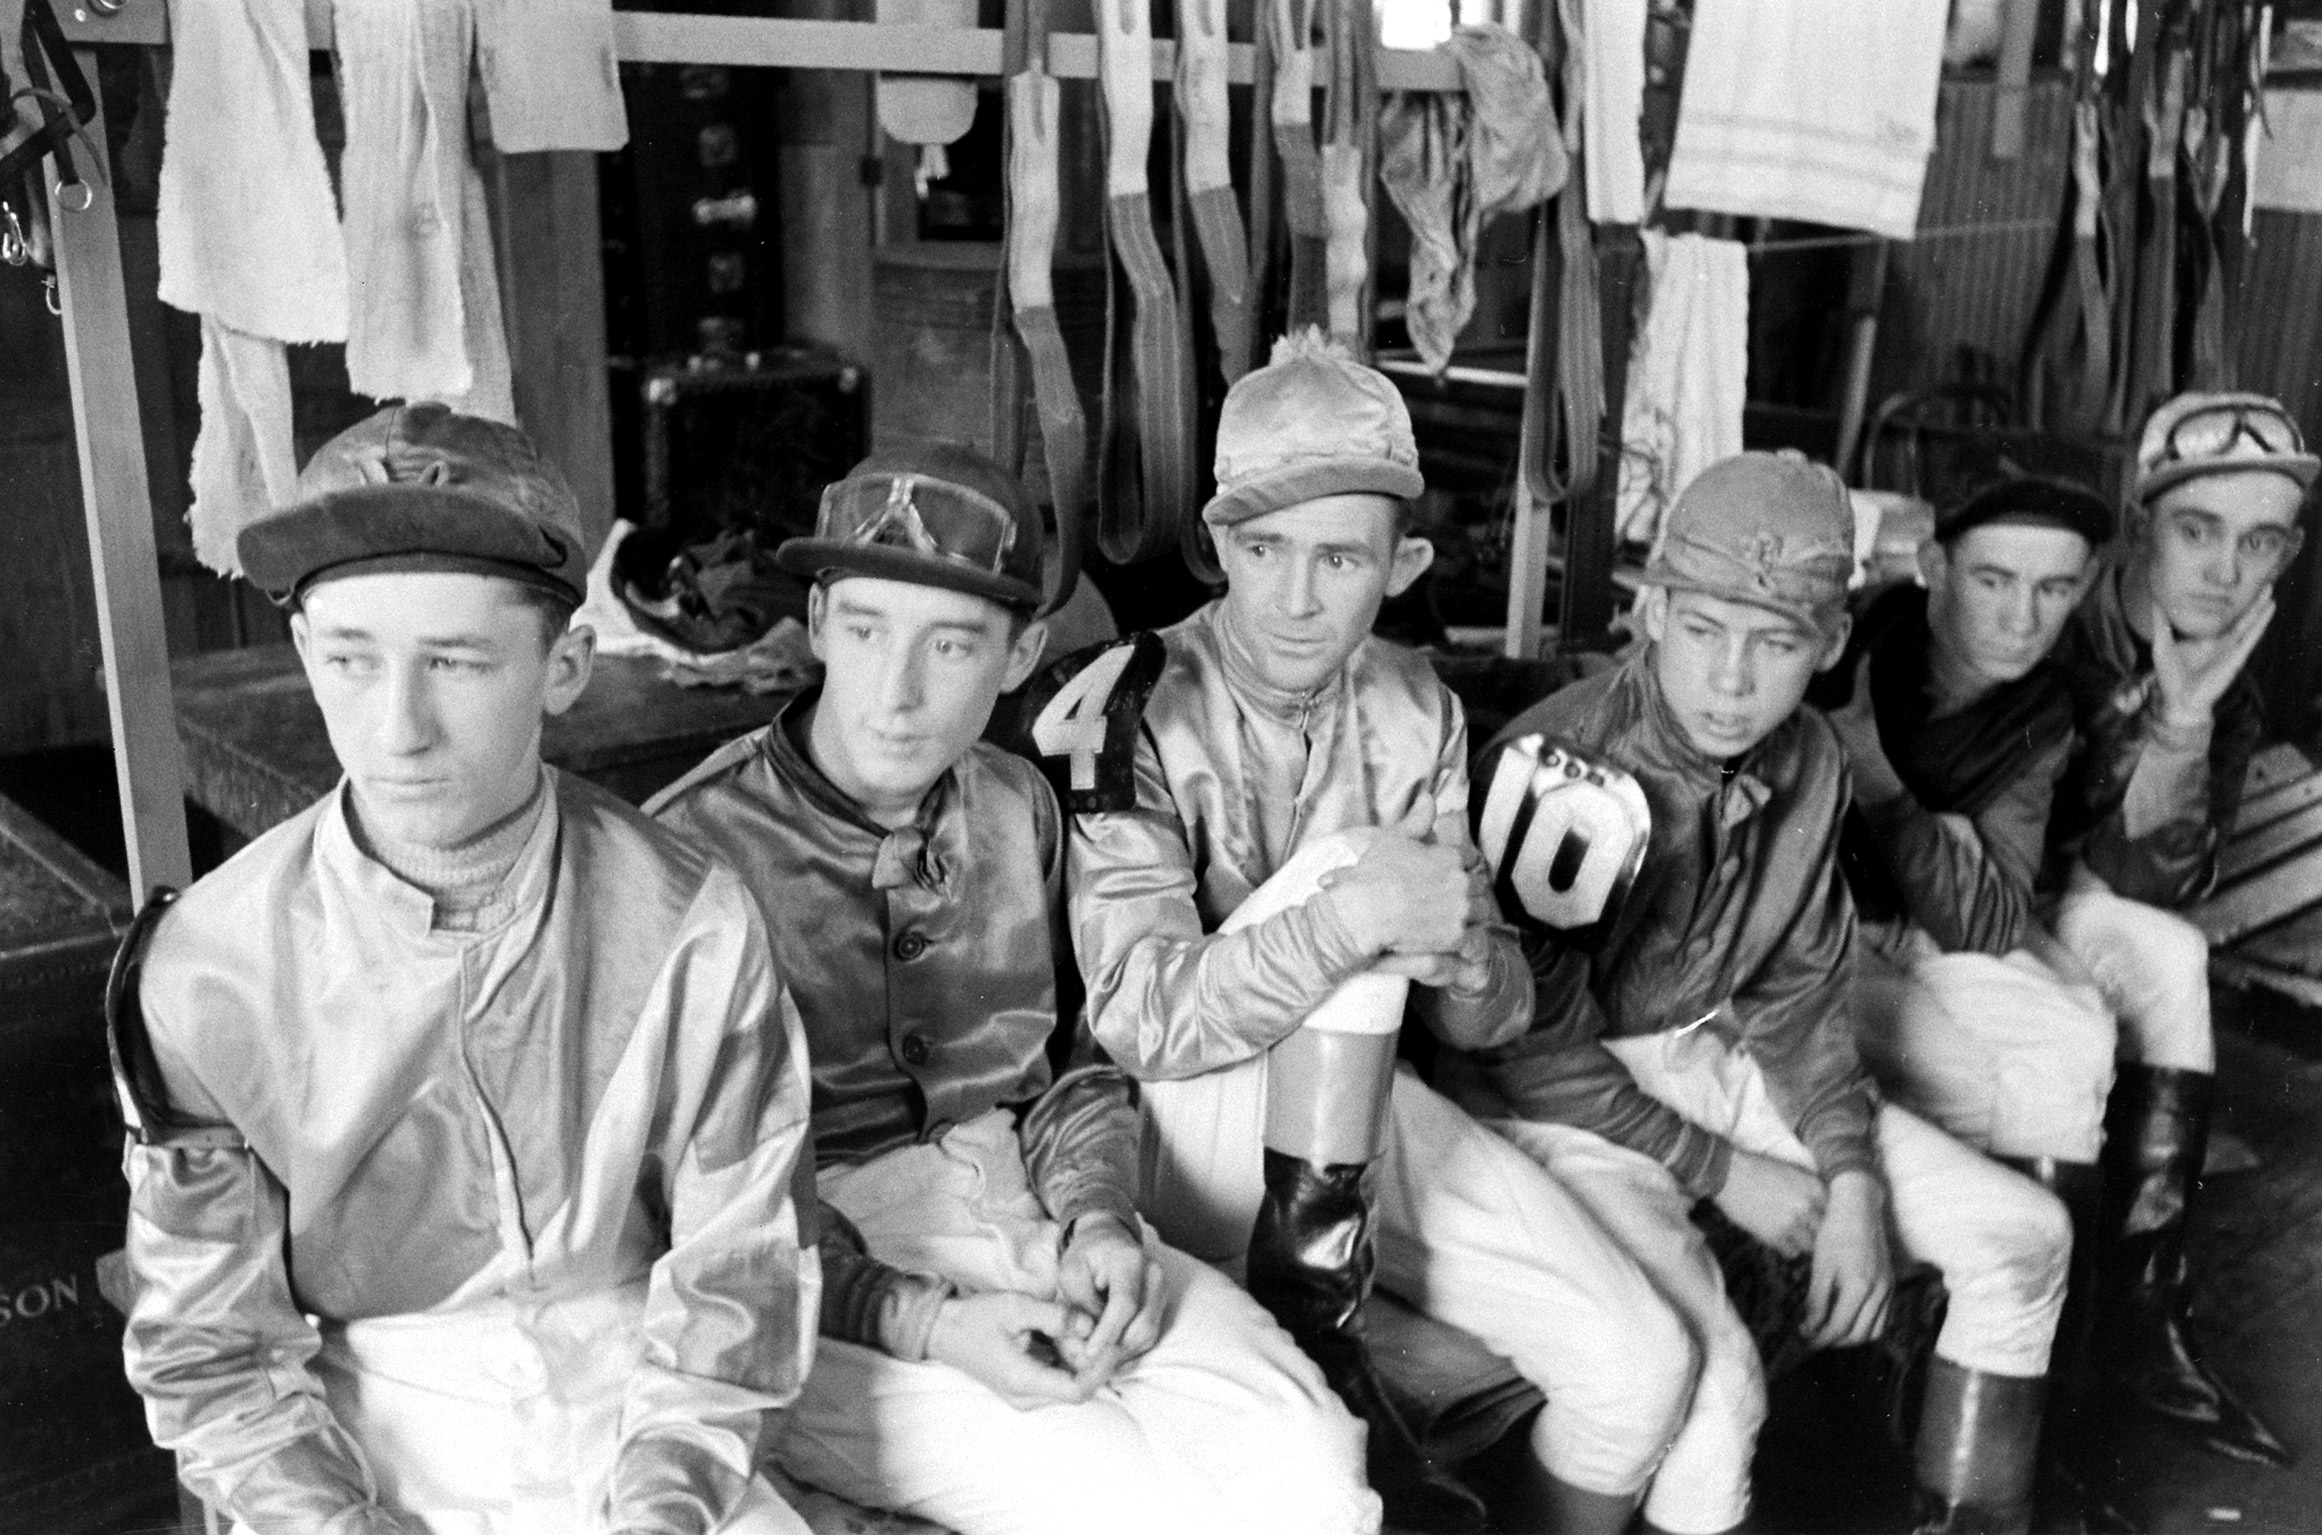 Churchill Downs jockeys in their quarters, include several who rode in the Kentucky Derby. At lower left is Hubert Leblanc who rode Miss Mary Hirsh's No Sir. Next to him is Hilton Dabson, who rode William Shea's and Miss E. G. Rand's Merry Maker. Fourth from left, with the number 10 on his sleeve is Basil James, who rode J. W. Parrish's Dellor.